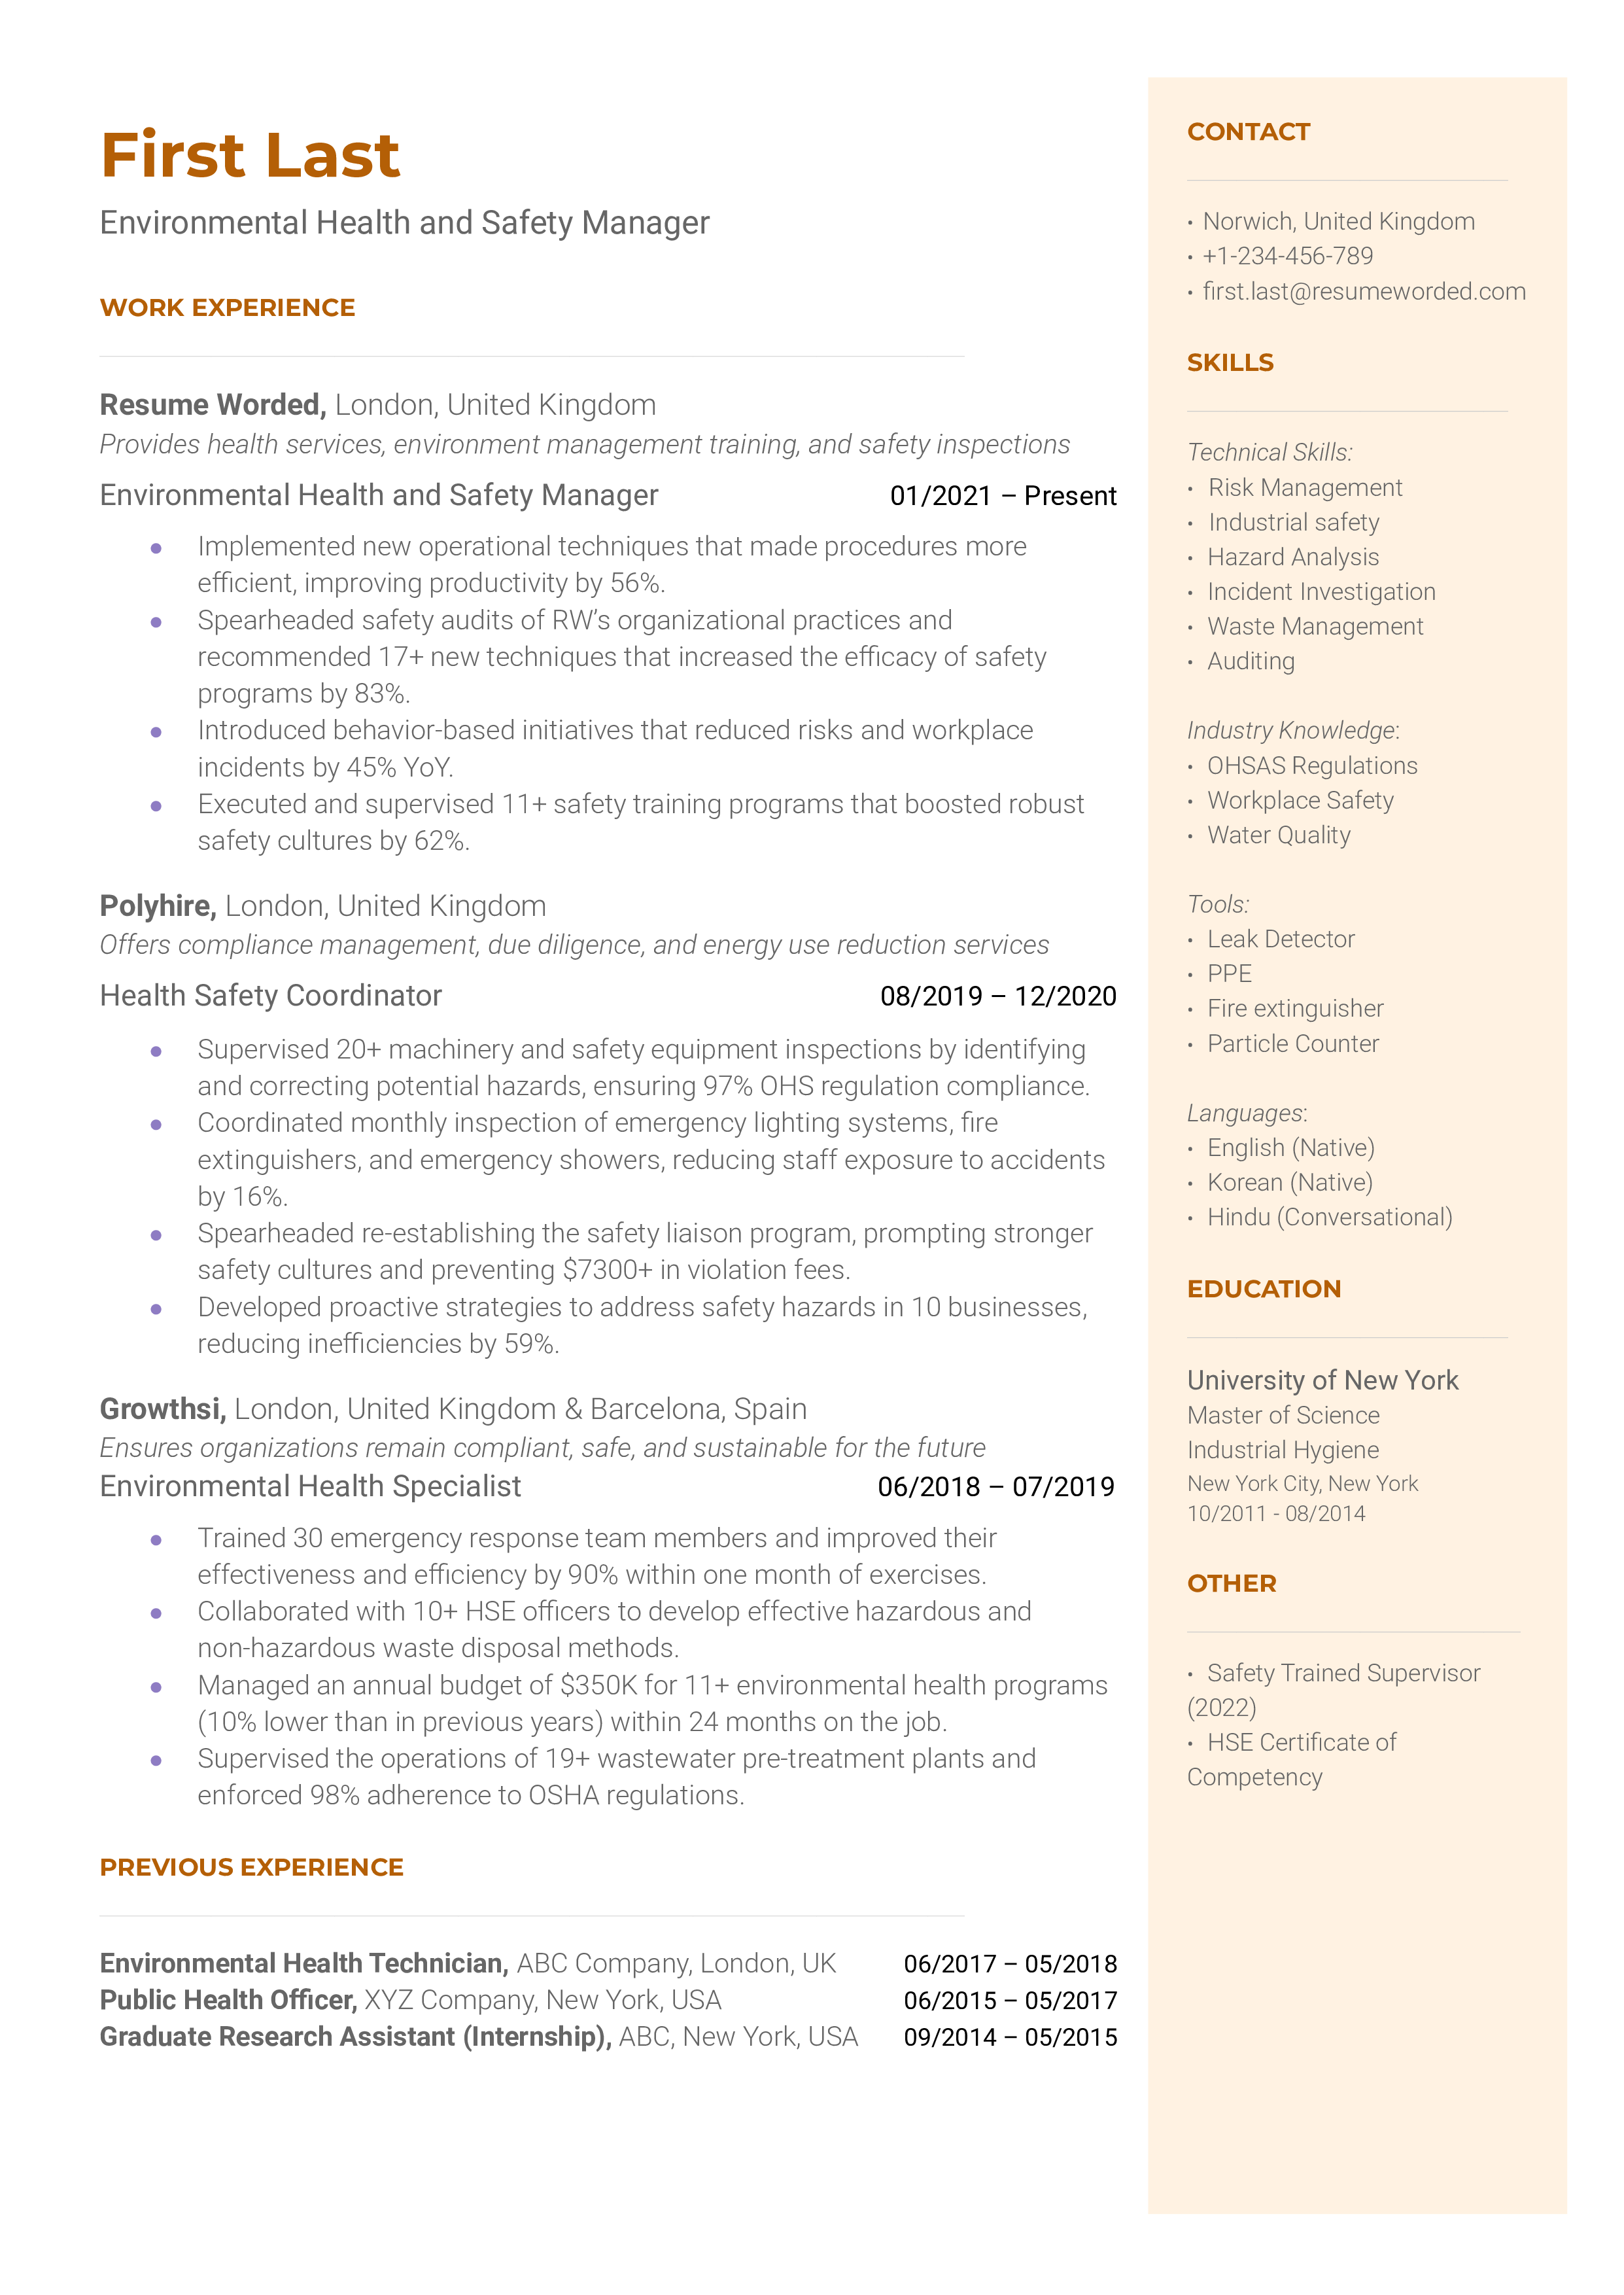 A environmental health and safety manager resume template using relevant certifications. 